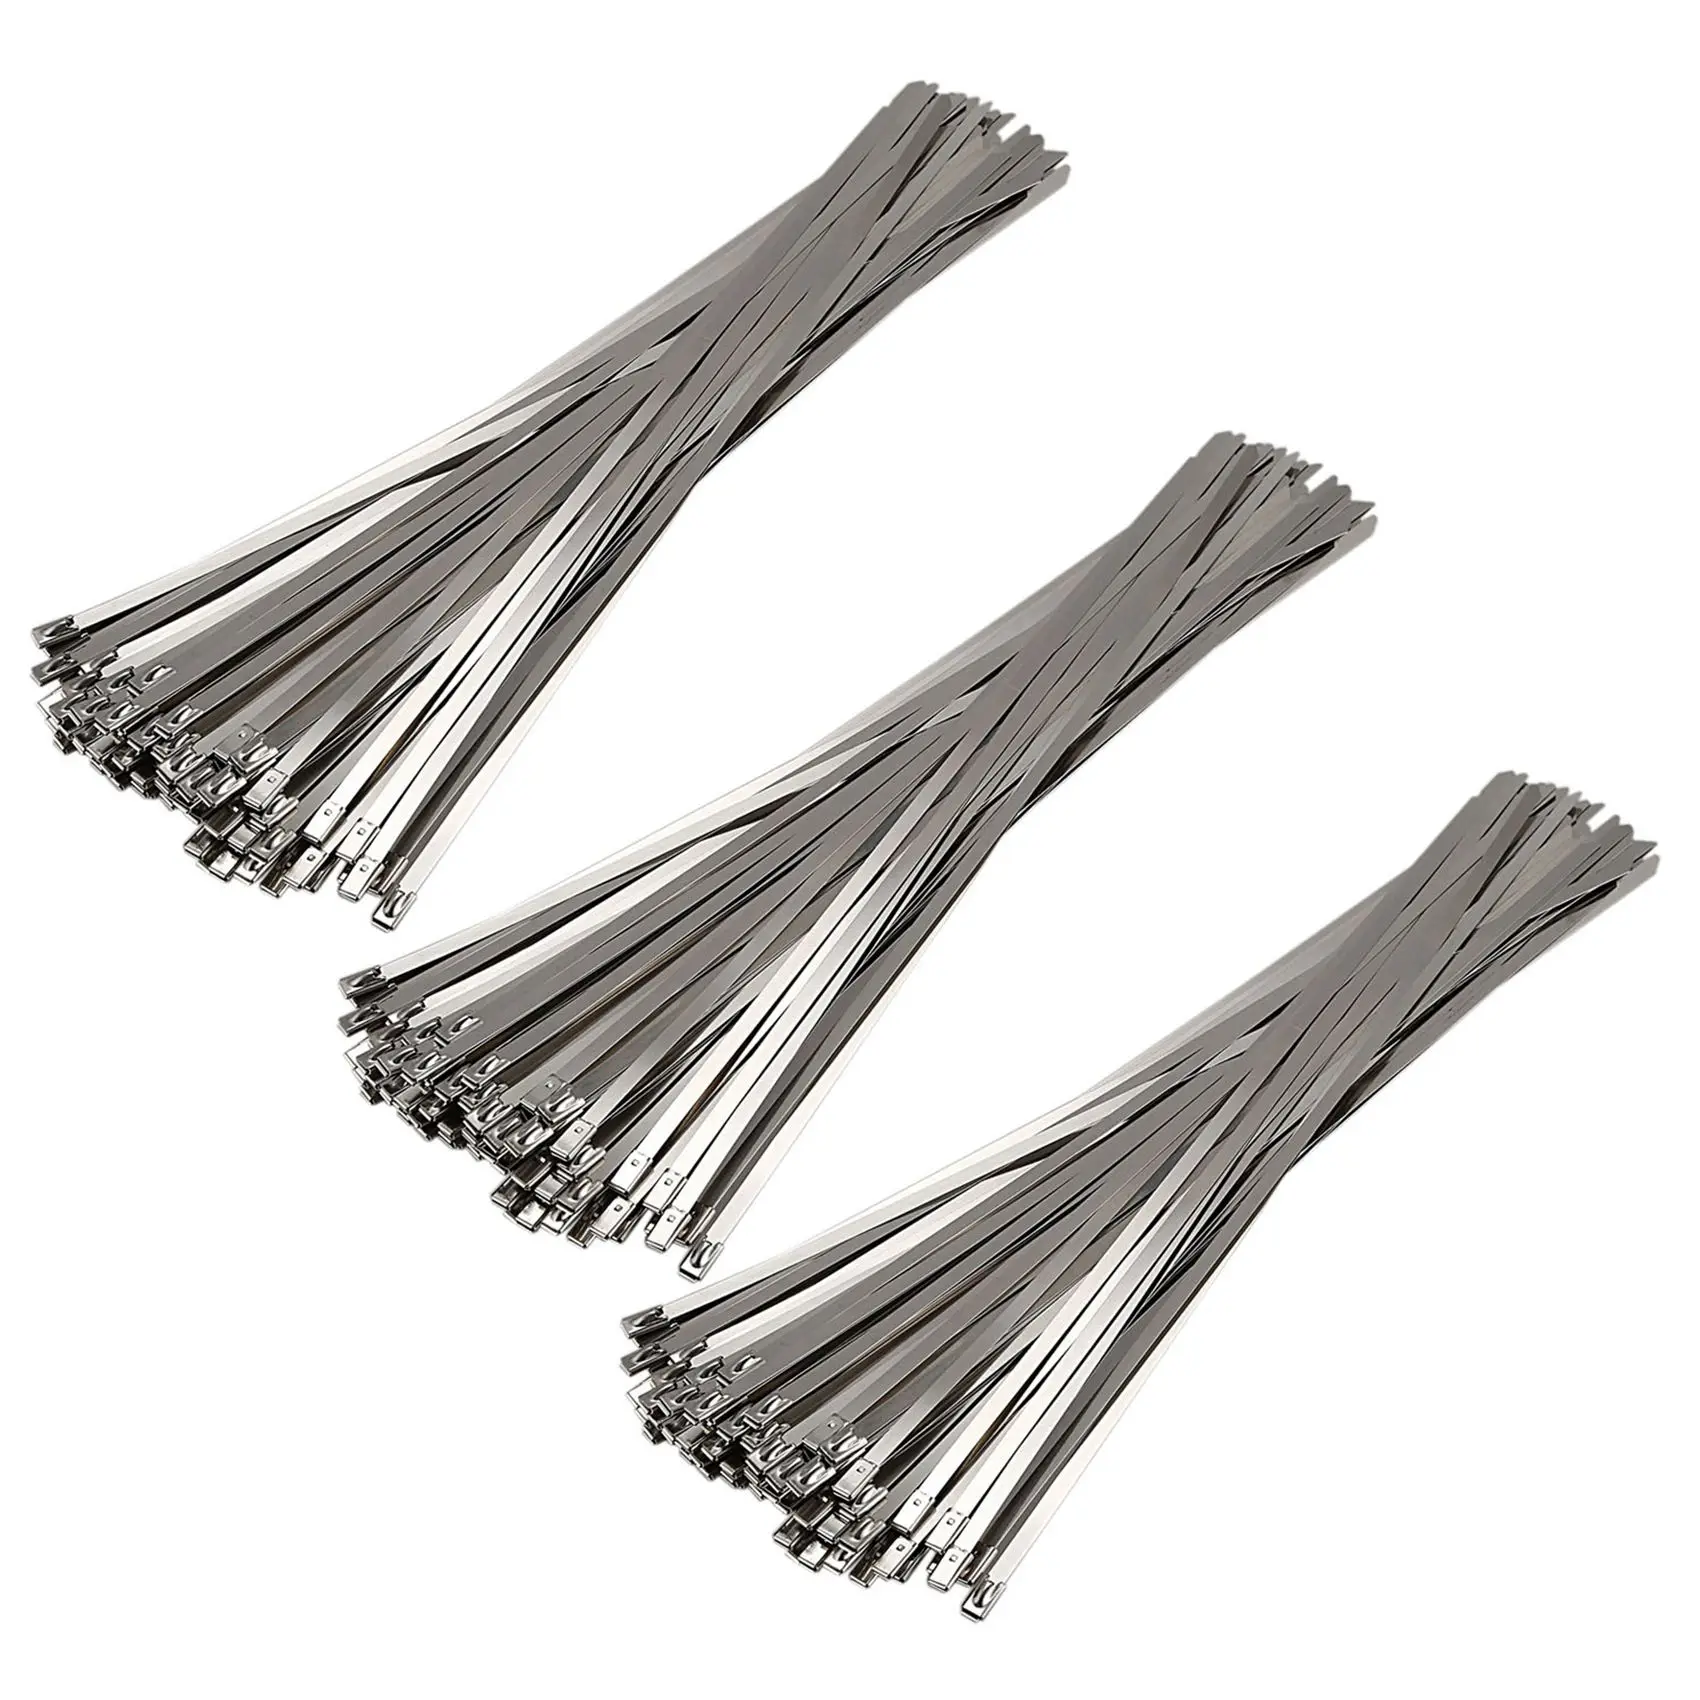 

300Pcs Stainless Steel Locking Cable Zip Ties Silver (4.6X300mm)